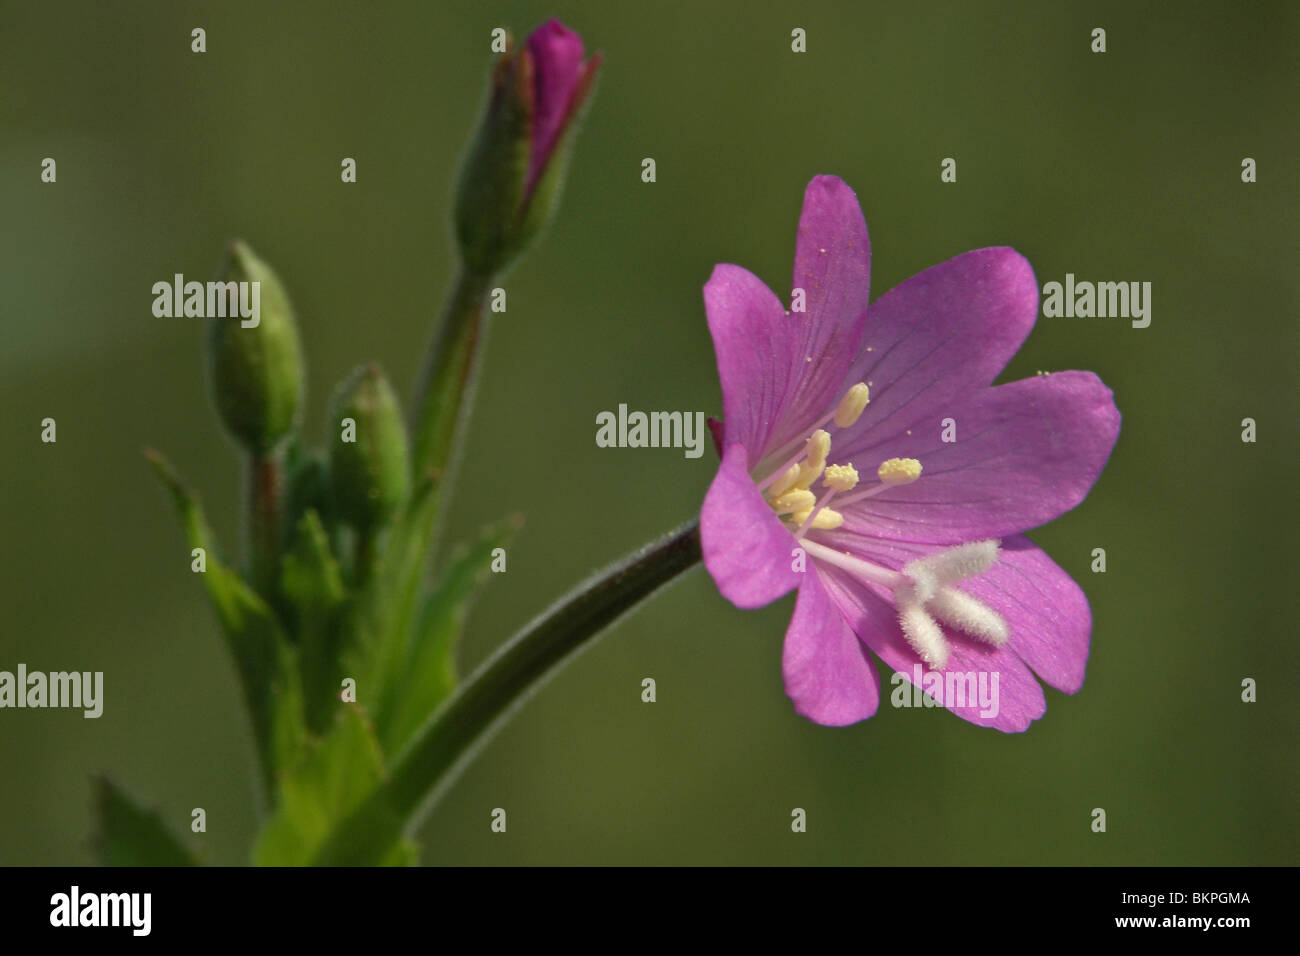 The flower of the Great Willowherb Stock Photo